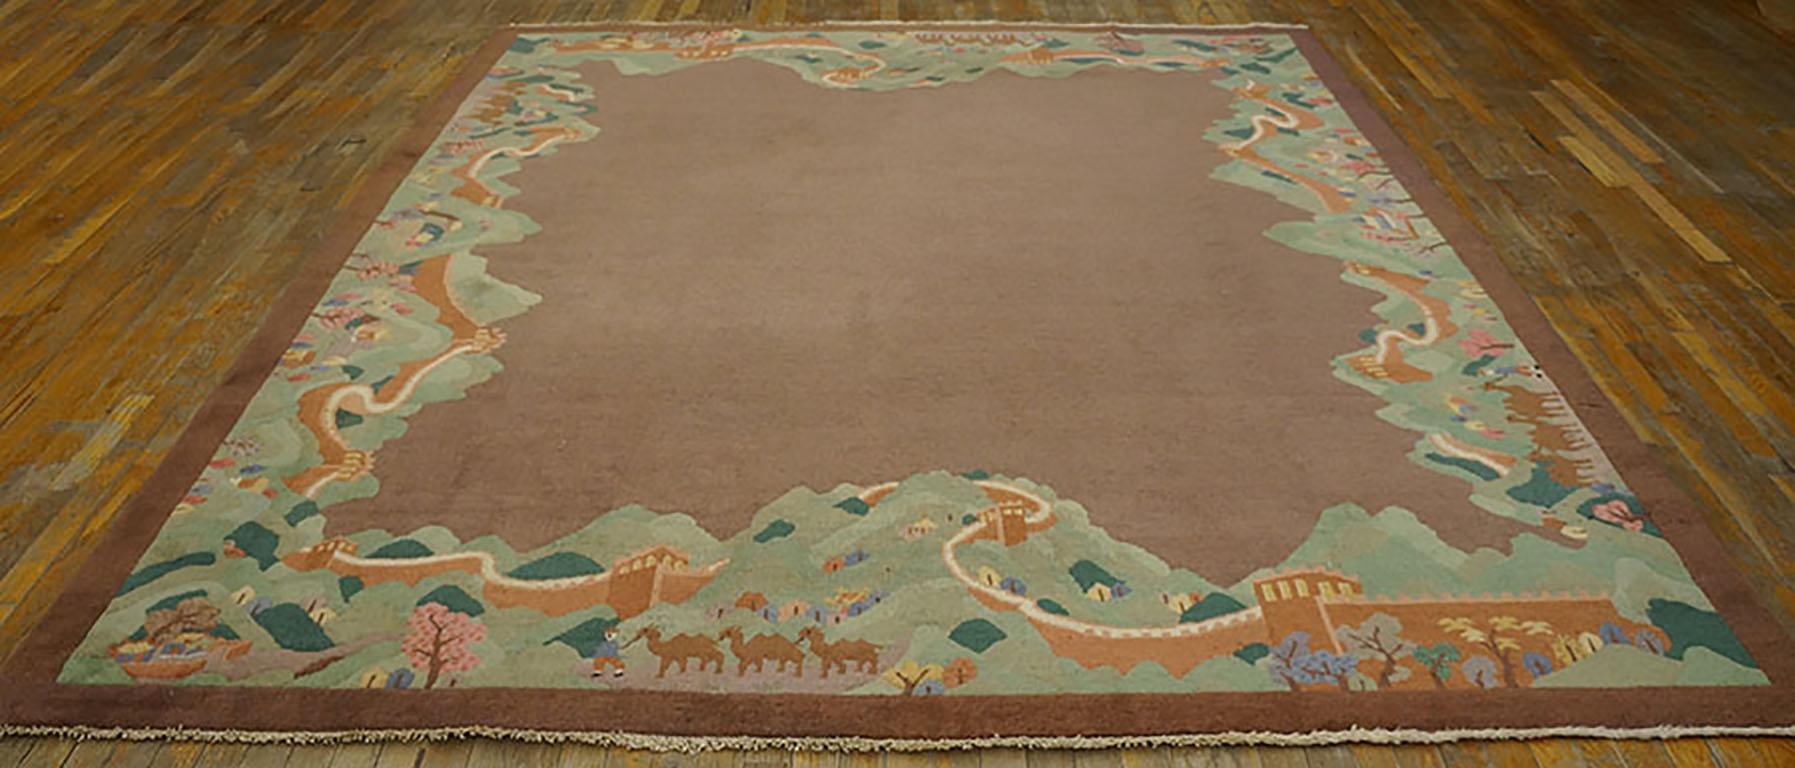 Chinese - Art Deco rug. Measures: 8'0